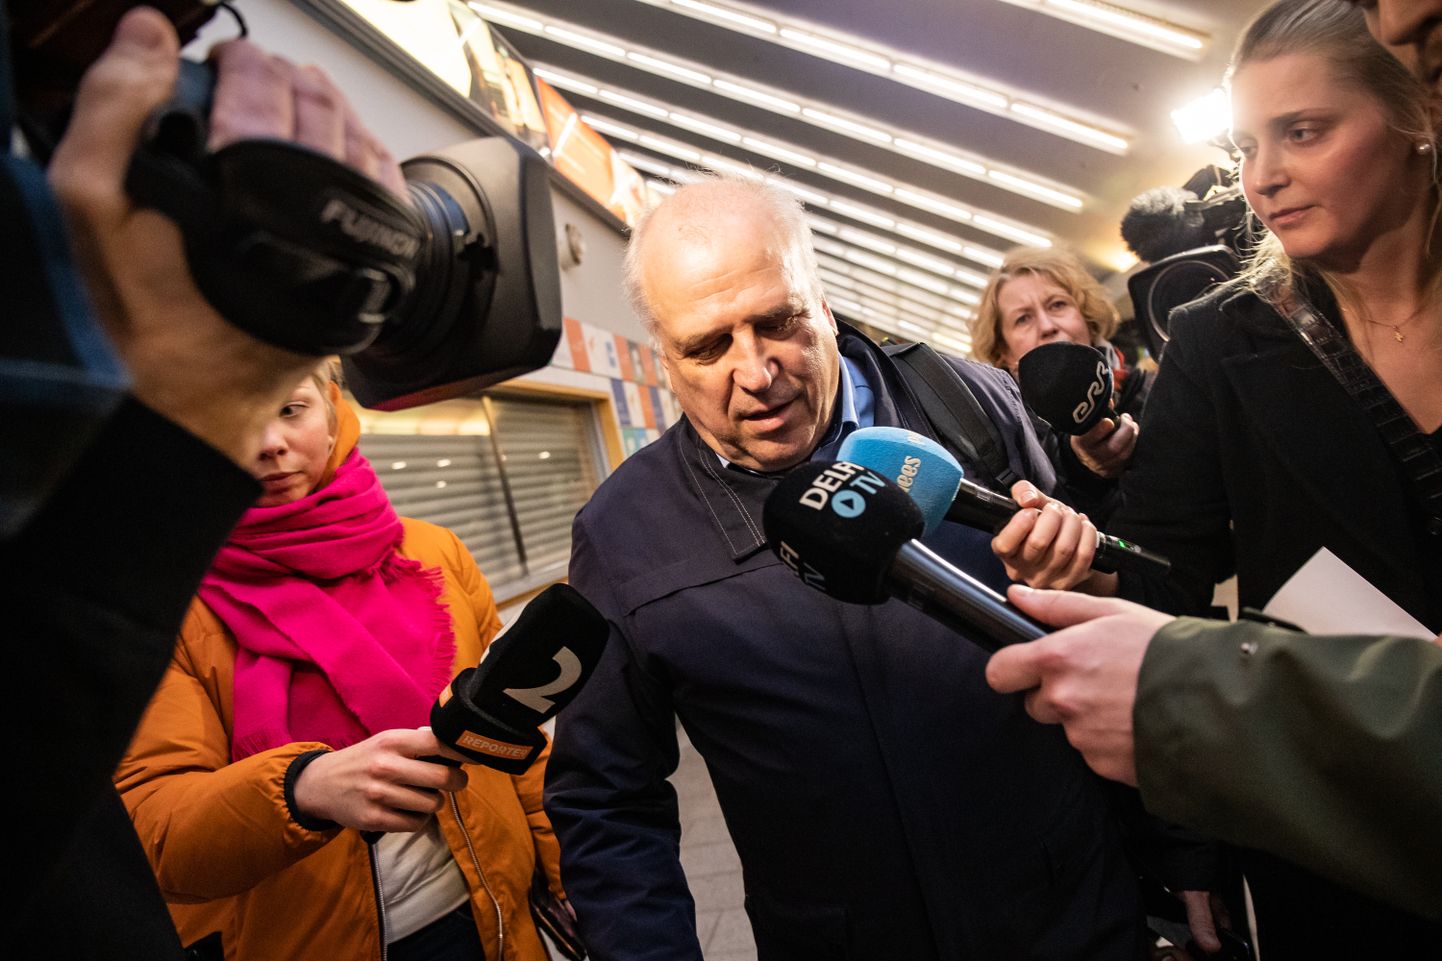 Mart Jarvik told journalists on Friday evening that he had no idea about his adviser Urmas Arumae's potential conflict of interests.